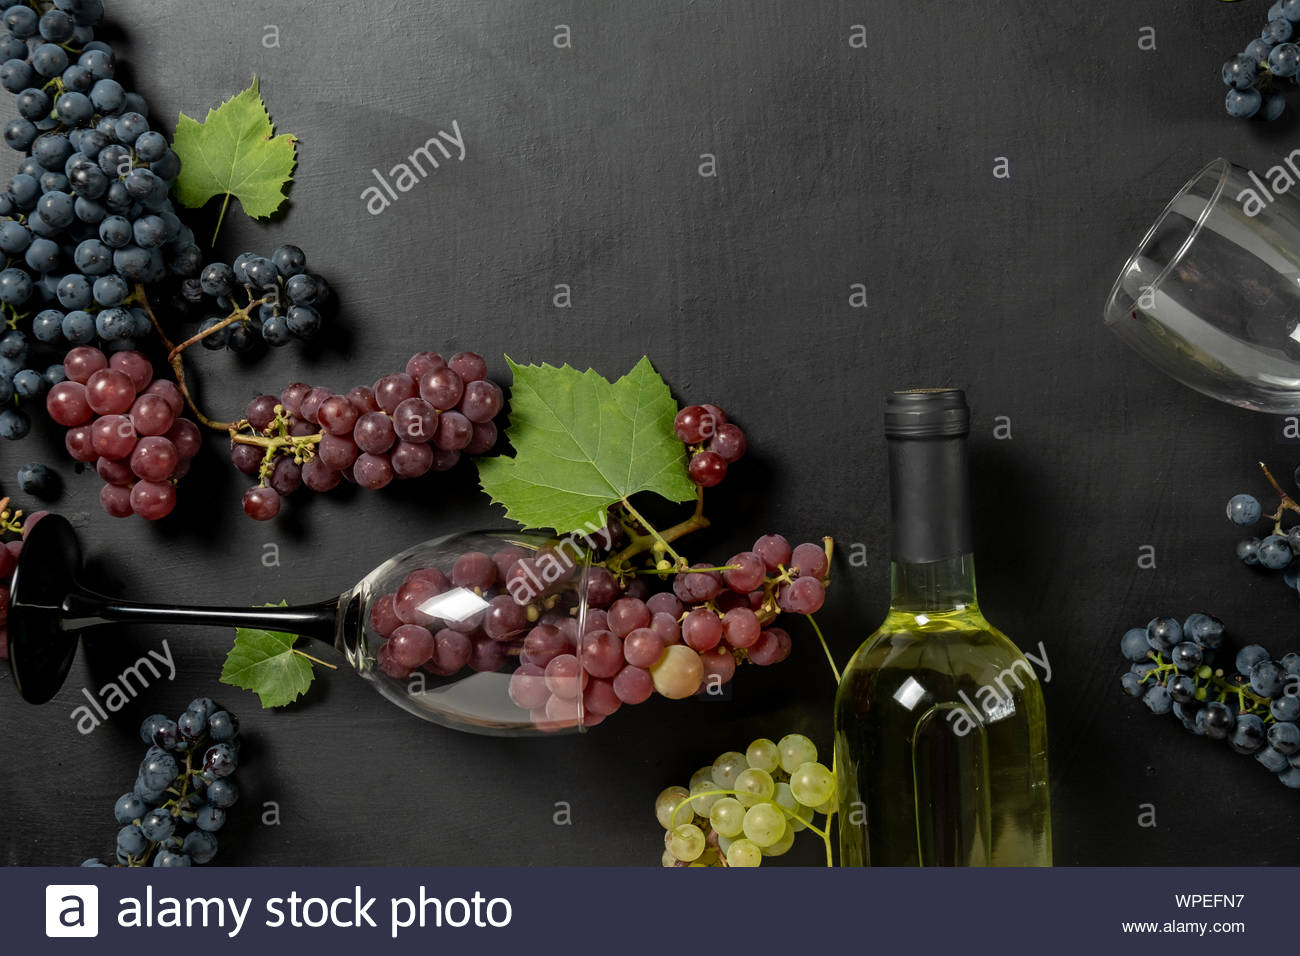 Bottle Two Wine Glasses Fresh Grapes And Leaves On Black